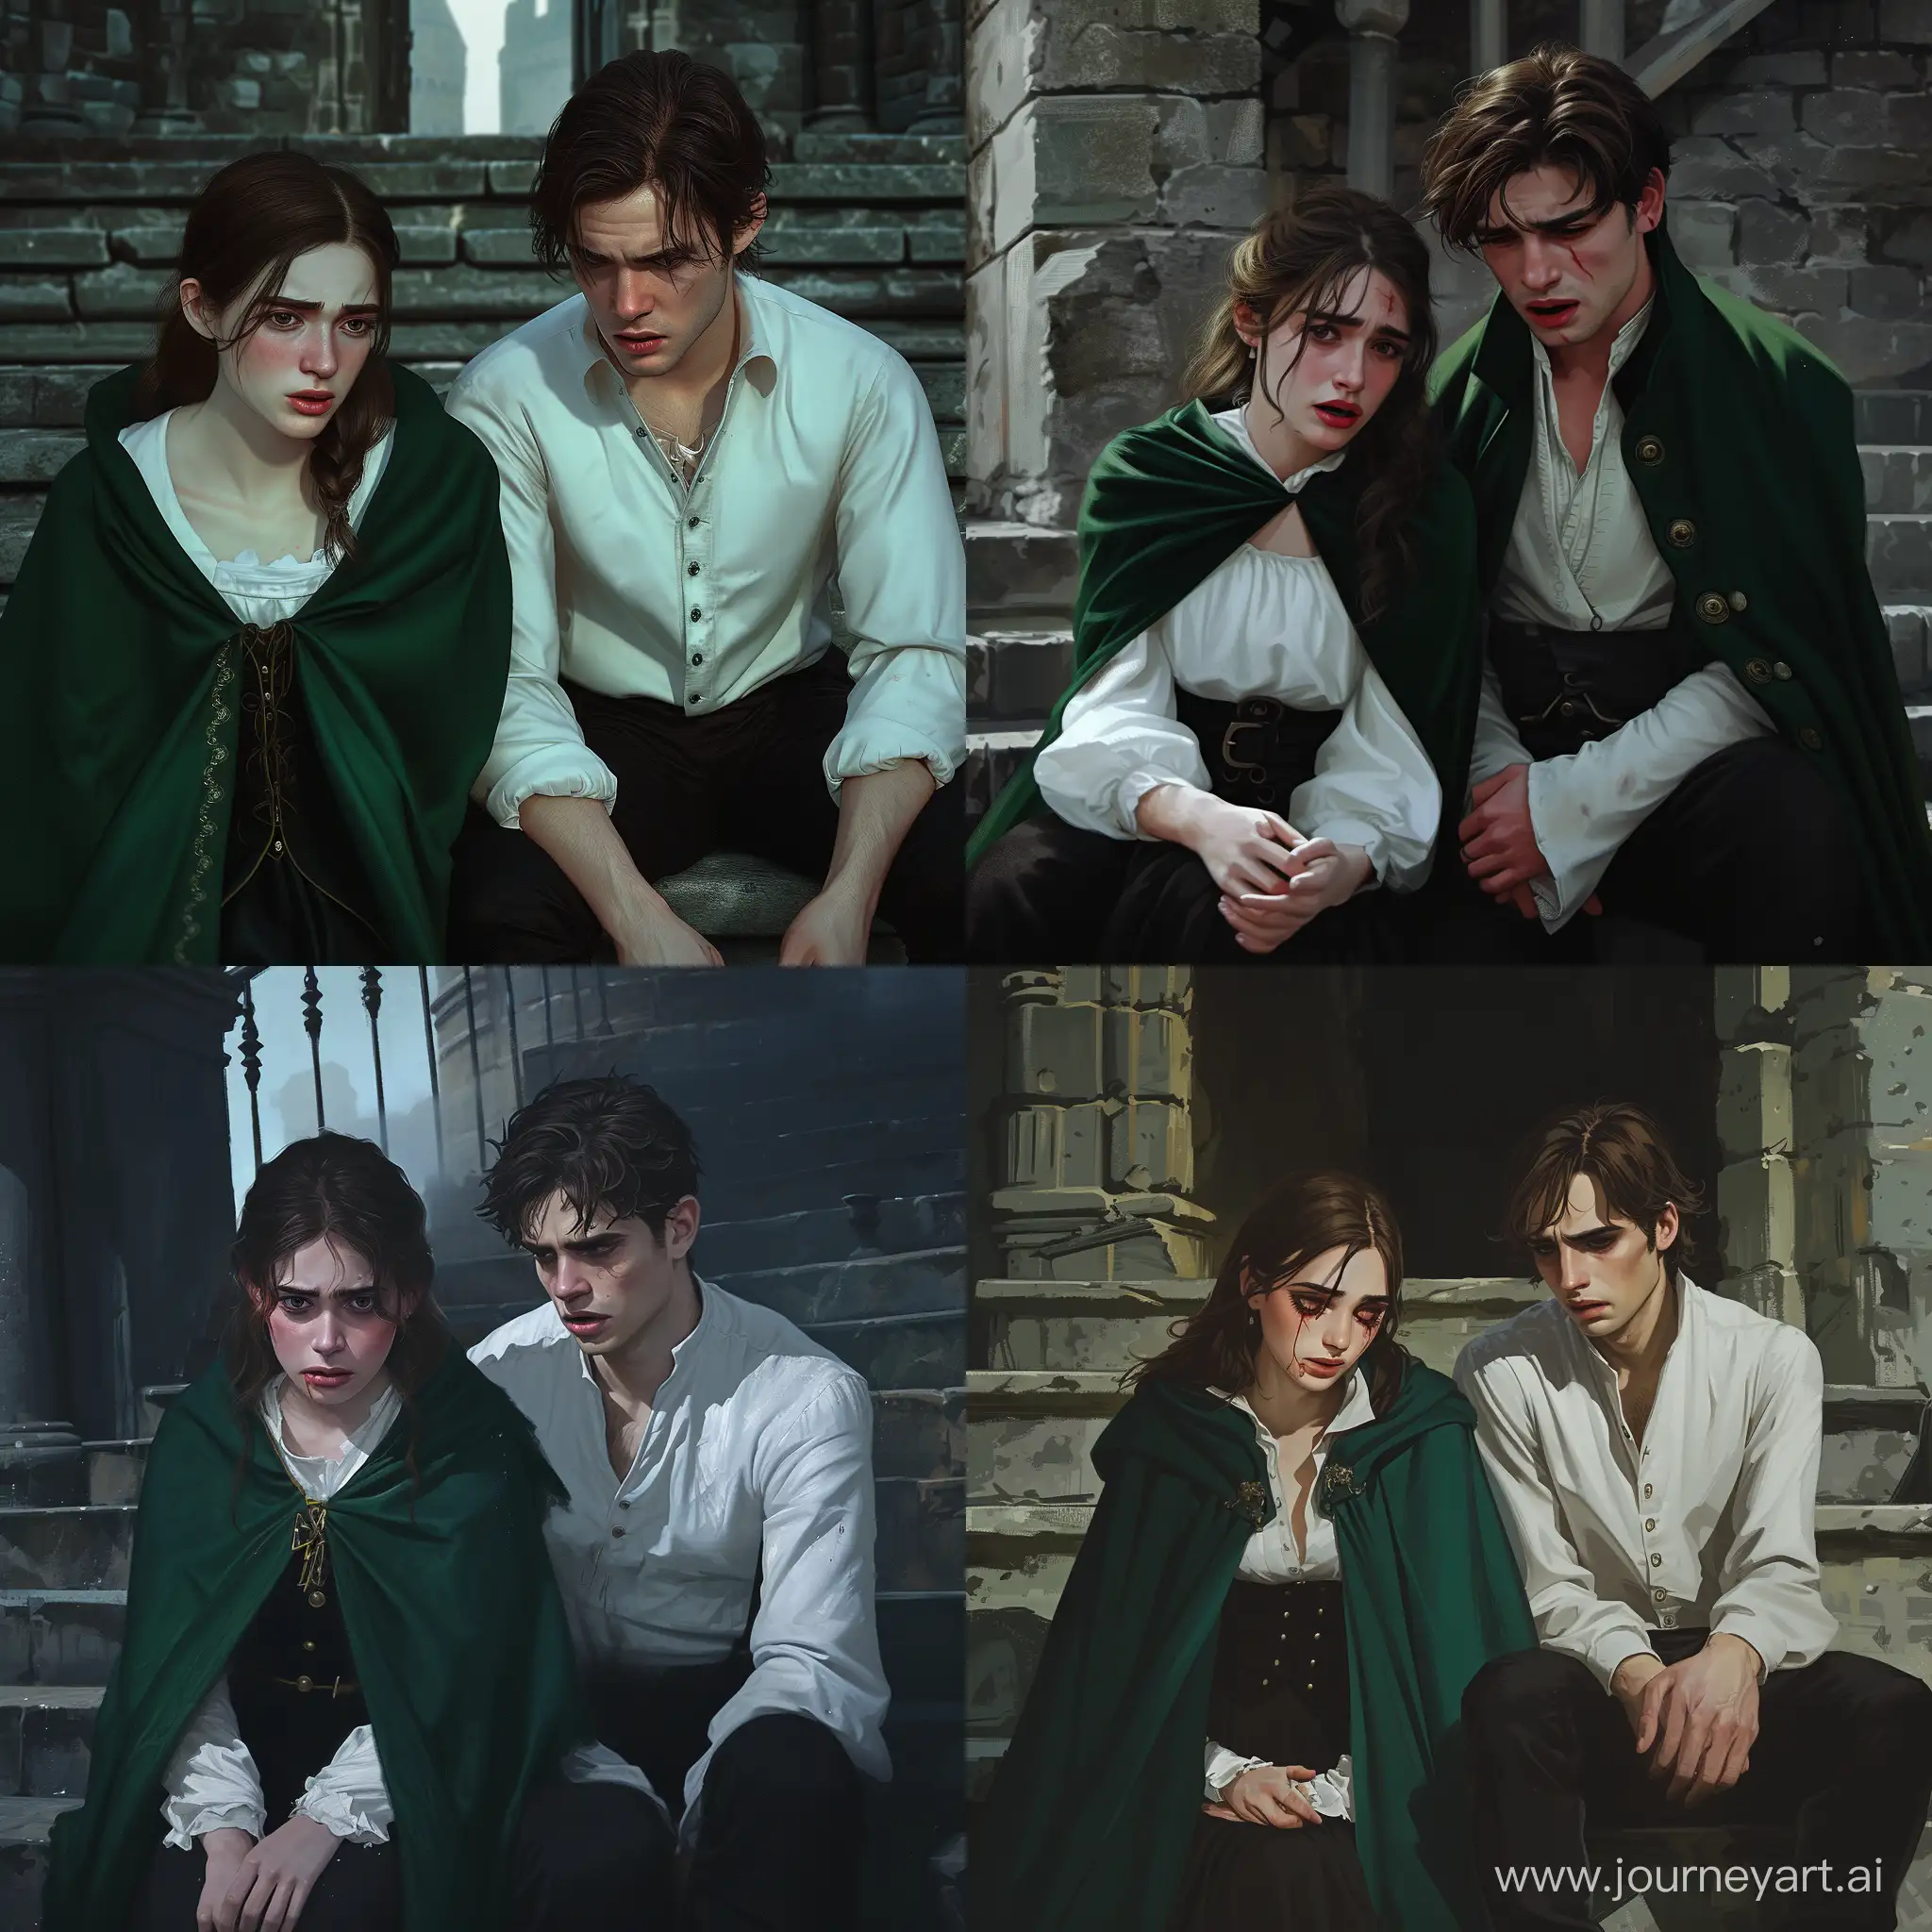 Emotional-Conversation-on-Tower-Steps-Beautiful-Girl-in-Green-Cloak-Apologizing-to-Handsome-Guy